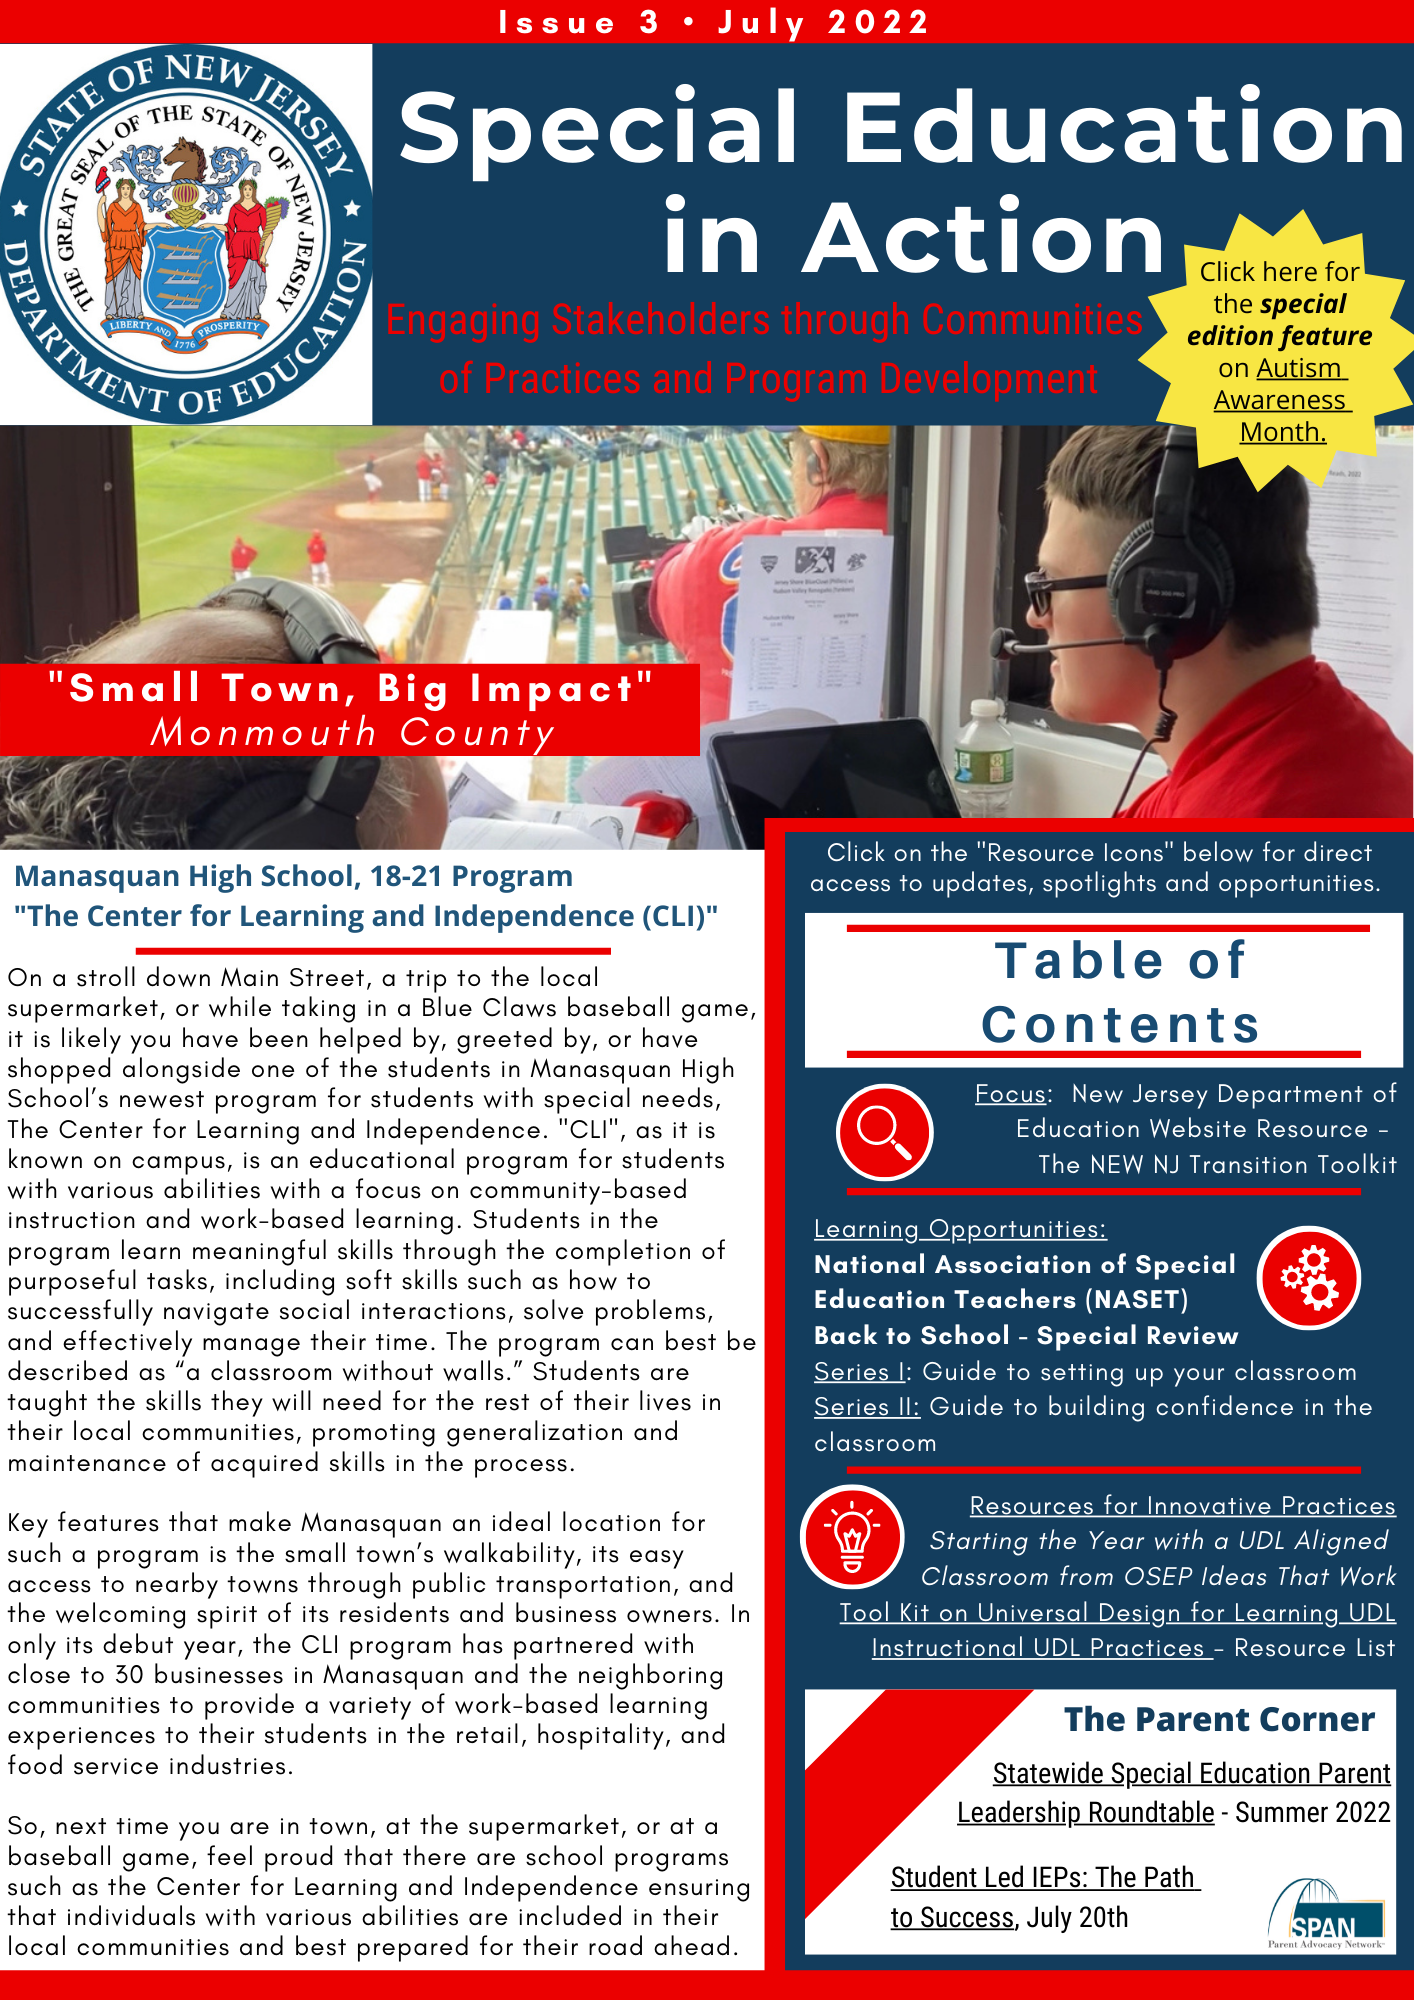 The cover of the 3rd issued newsletter for special education in action